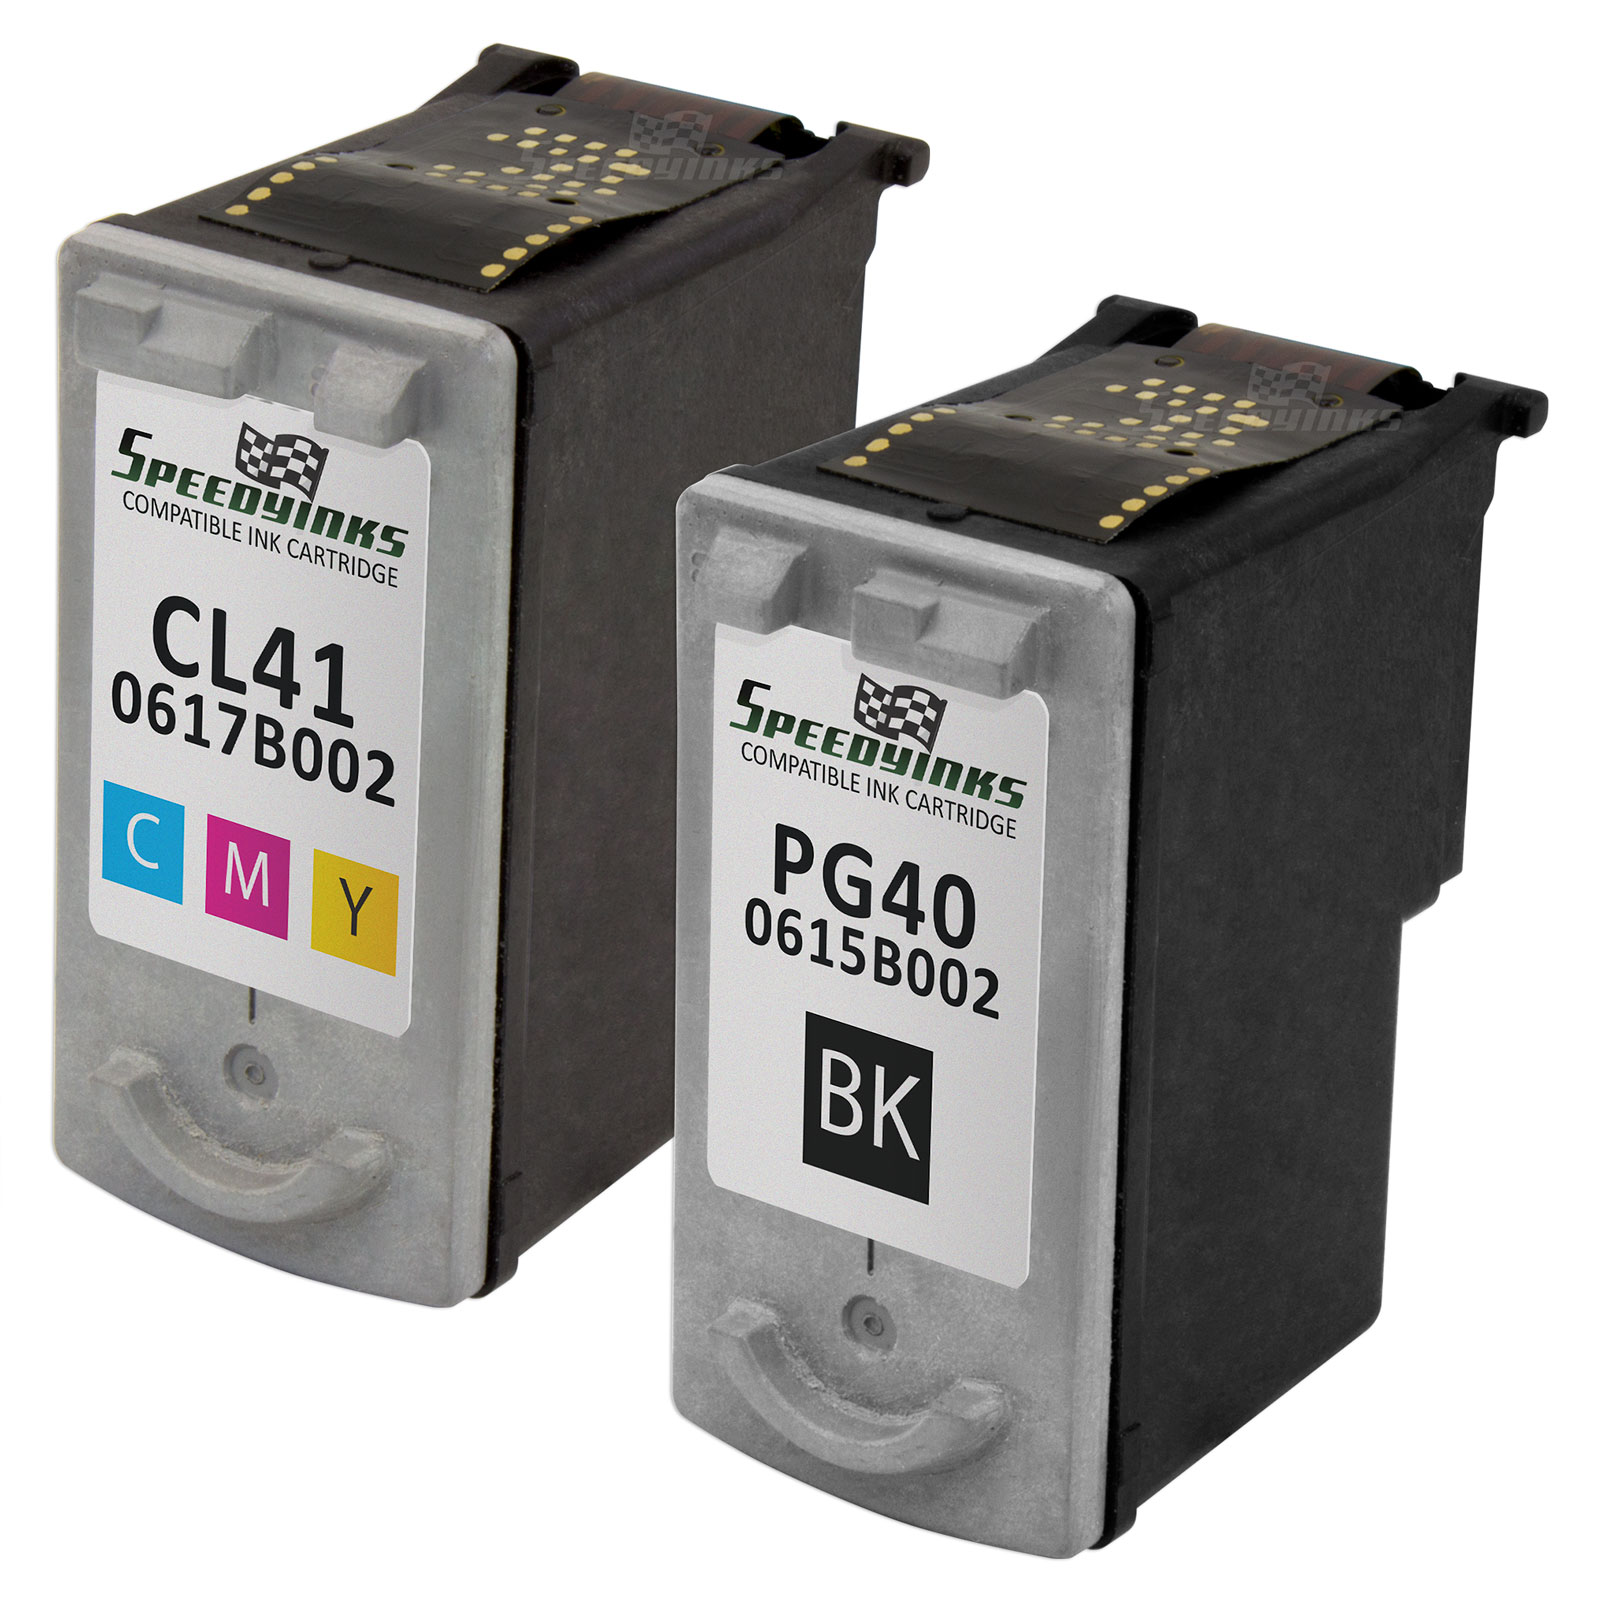 Remanufactured Canon PG40 & CL41 Cartridges For Canon PIXMA iP1700, PIXMA MP460, PIXMA MP450, PIXMA MP140, PIXMA MP180, PIXMA MP190, PIXMA iP2600, Fax Series JX200, PIXMA MP170 - image 4 of 4